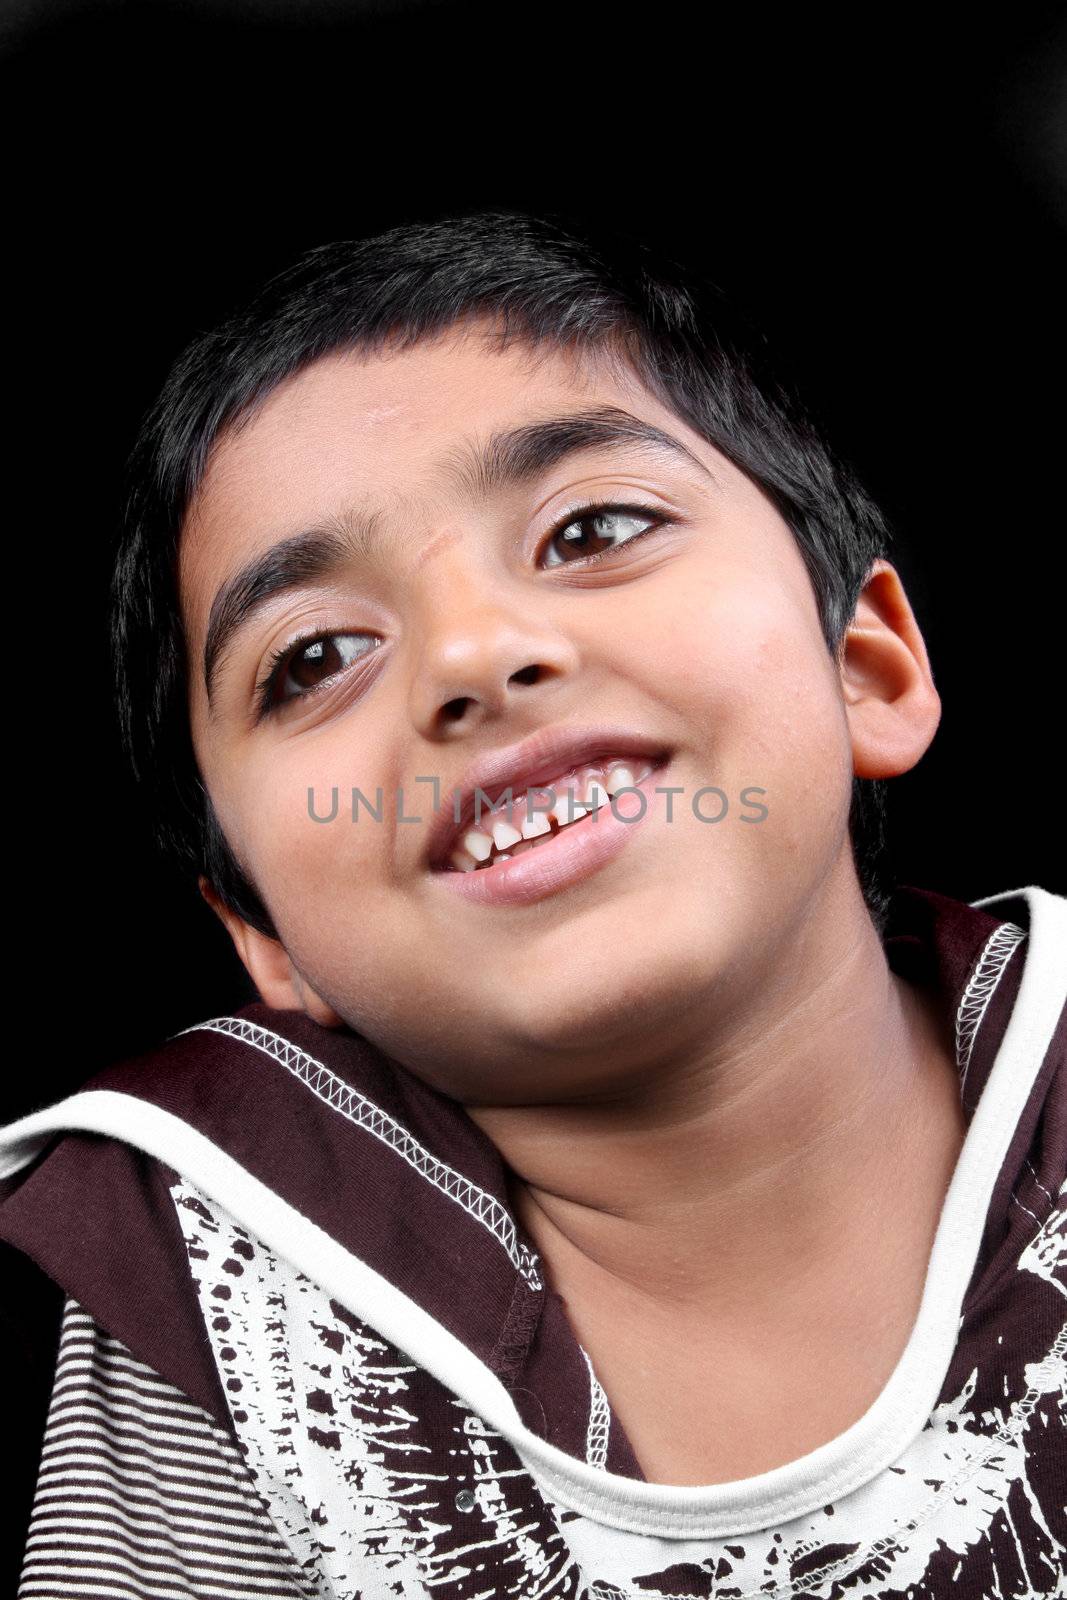 A portrait of a happy Indian kid.